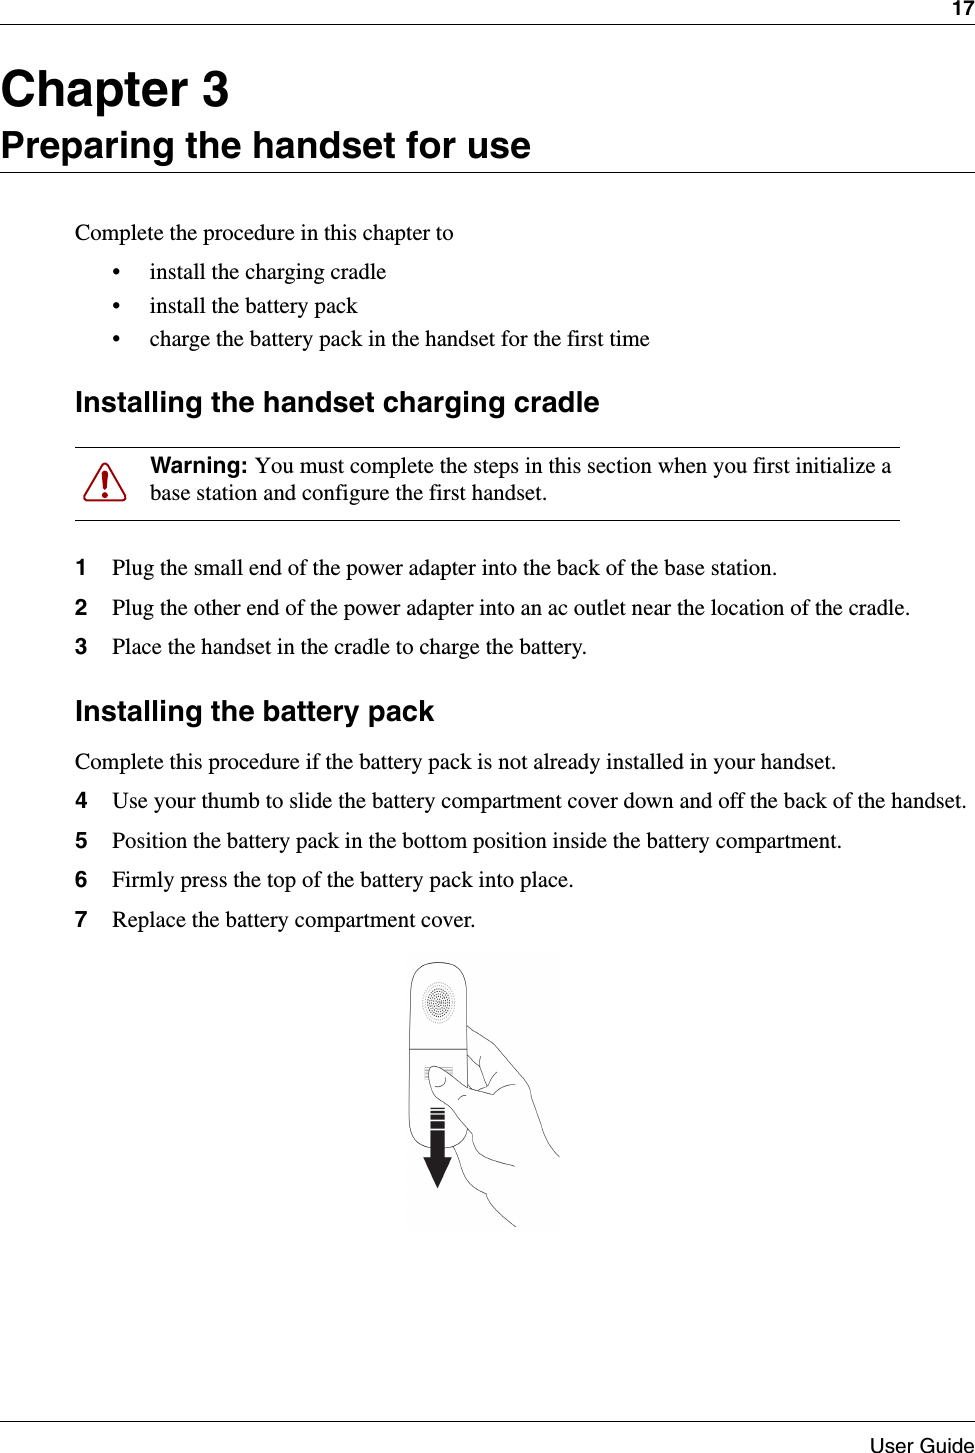 17User GuideChapter 3Preparing the handset for useComplete the procedure in this chapter to• install the charging cradle• install the battery pack• charge the battery pack in the handset for the first timeInstalling the handset charging cradle1Plug the small end of the power adapter into the back of the base station.2Plug the other end of the power adapter into an ac outlet near the location of the cradle.3Place the handset in the cradle to charge the battery.Installing the battery packComplete this procedure if the battery pack is not already installed in your handset.4Use your thumb to slide the battery compartment cover down and off the back of the handset.5Position the battery pack in the bottom position inside the battery compartment.6Firmly press the top of the battery pack into place.7Replace the battery compartment cover.Warning: You must complete the steps in this section when you first initialize a base station and configure the first handset.